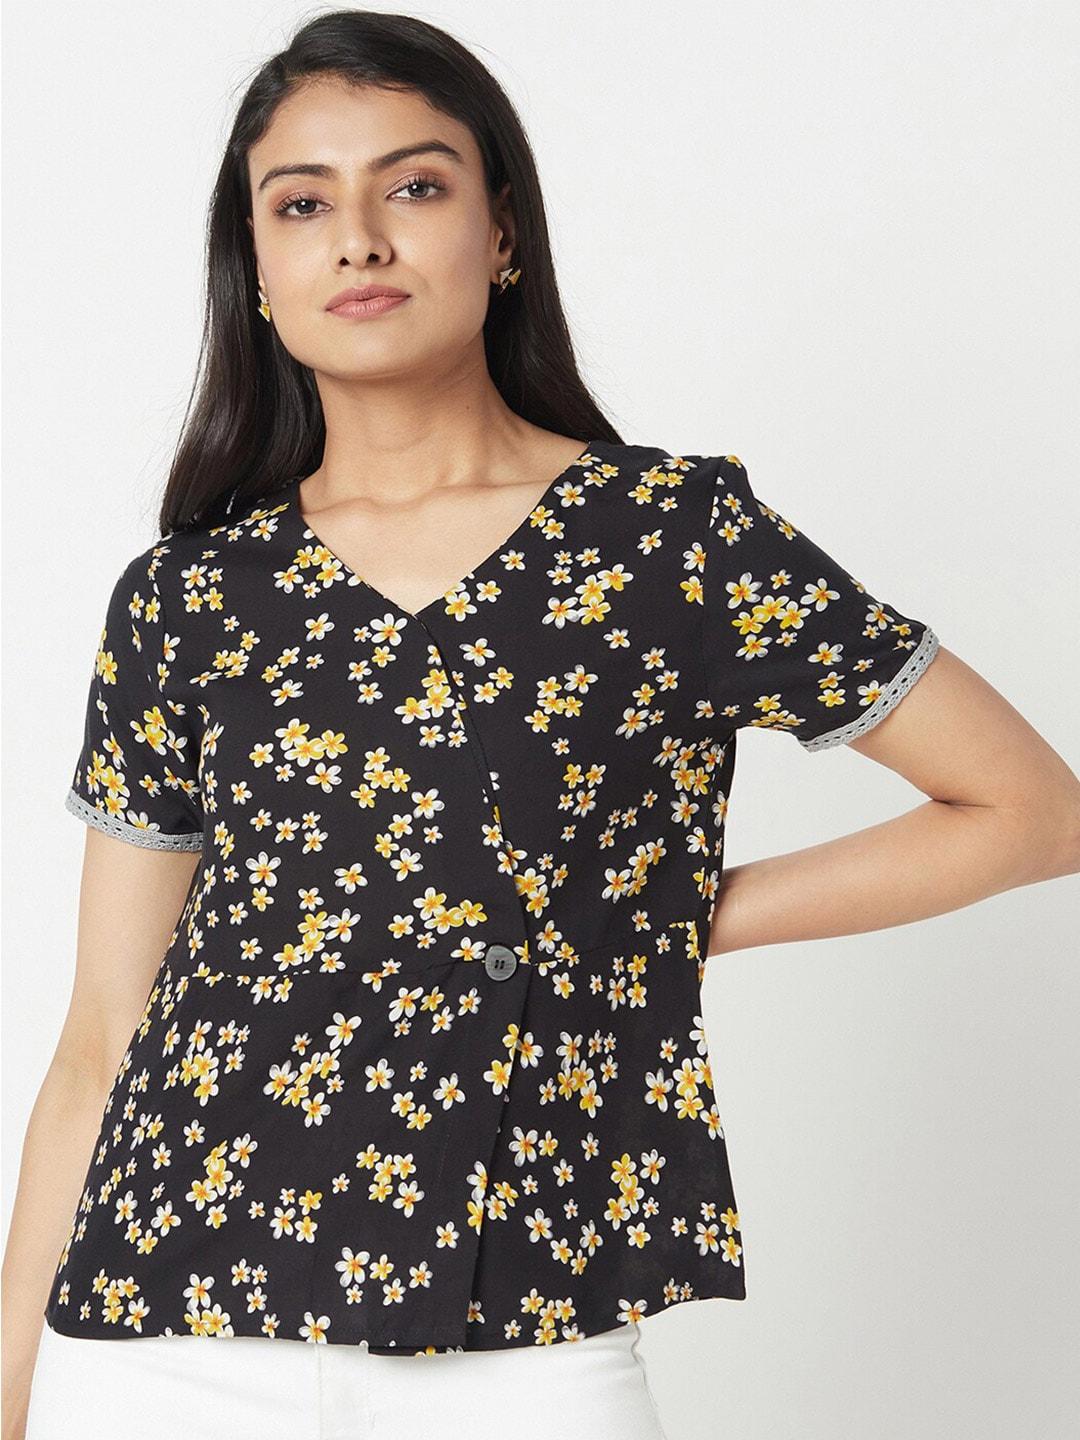 Miss Grace Floral Printed Lace Inserts Top